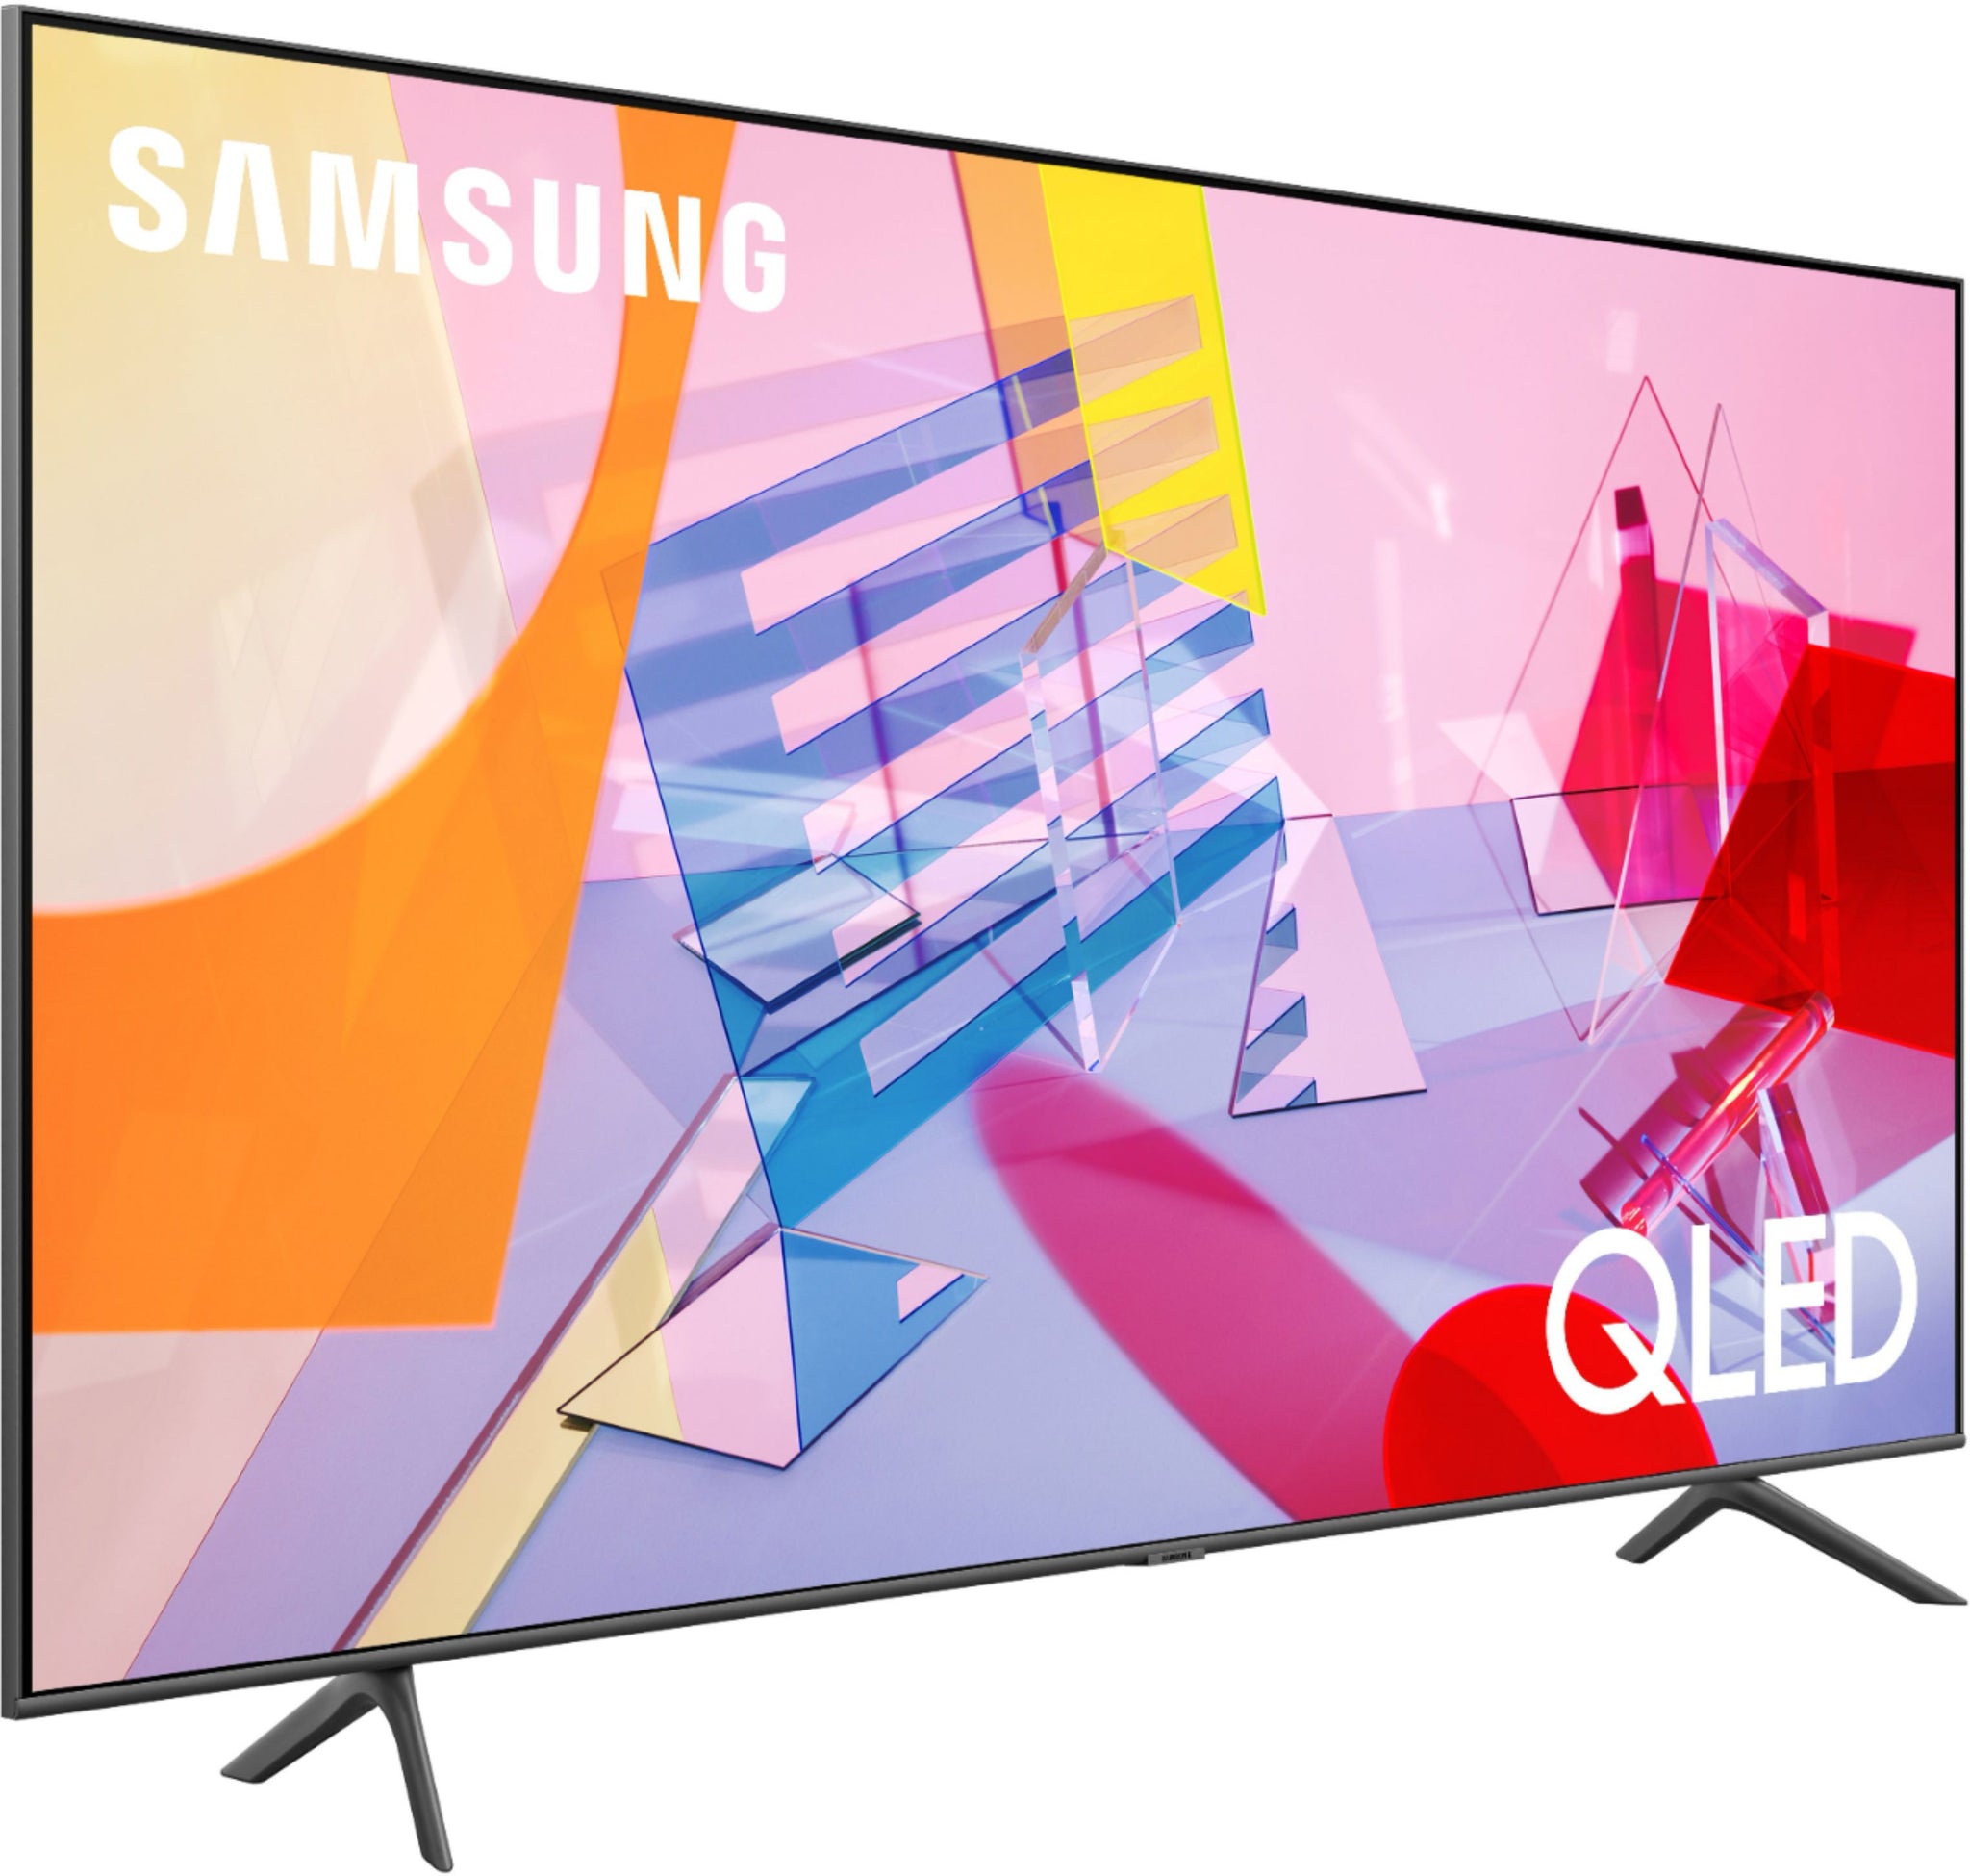 Samsung 82" Class Q6D QLED Smart 4K UHD TV (Refurbished) Tv's ONLY for delivery in San Diego and Tijuana